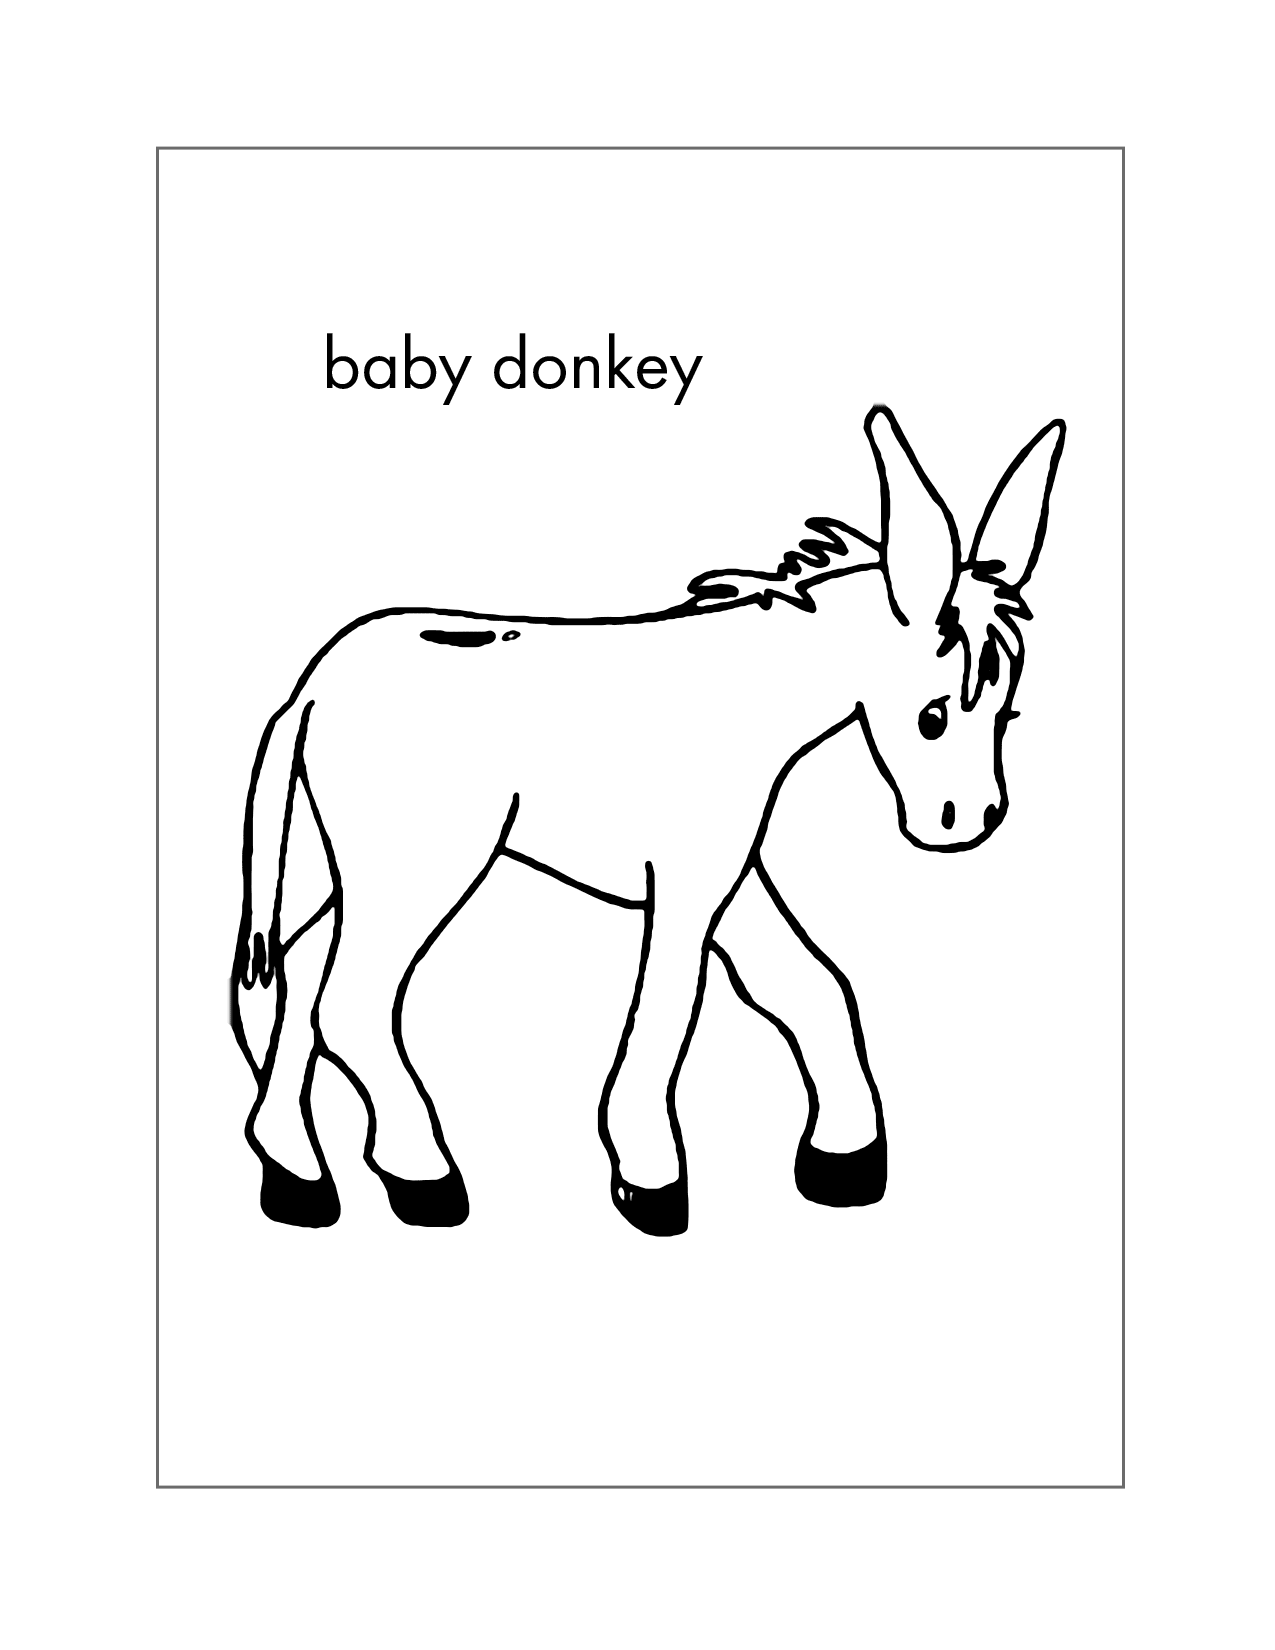 Baby Donkey Coloring Page